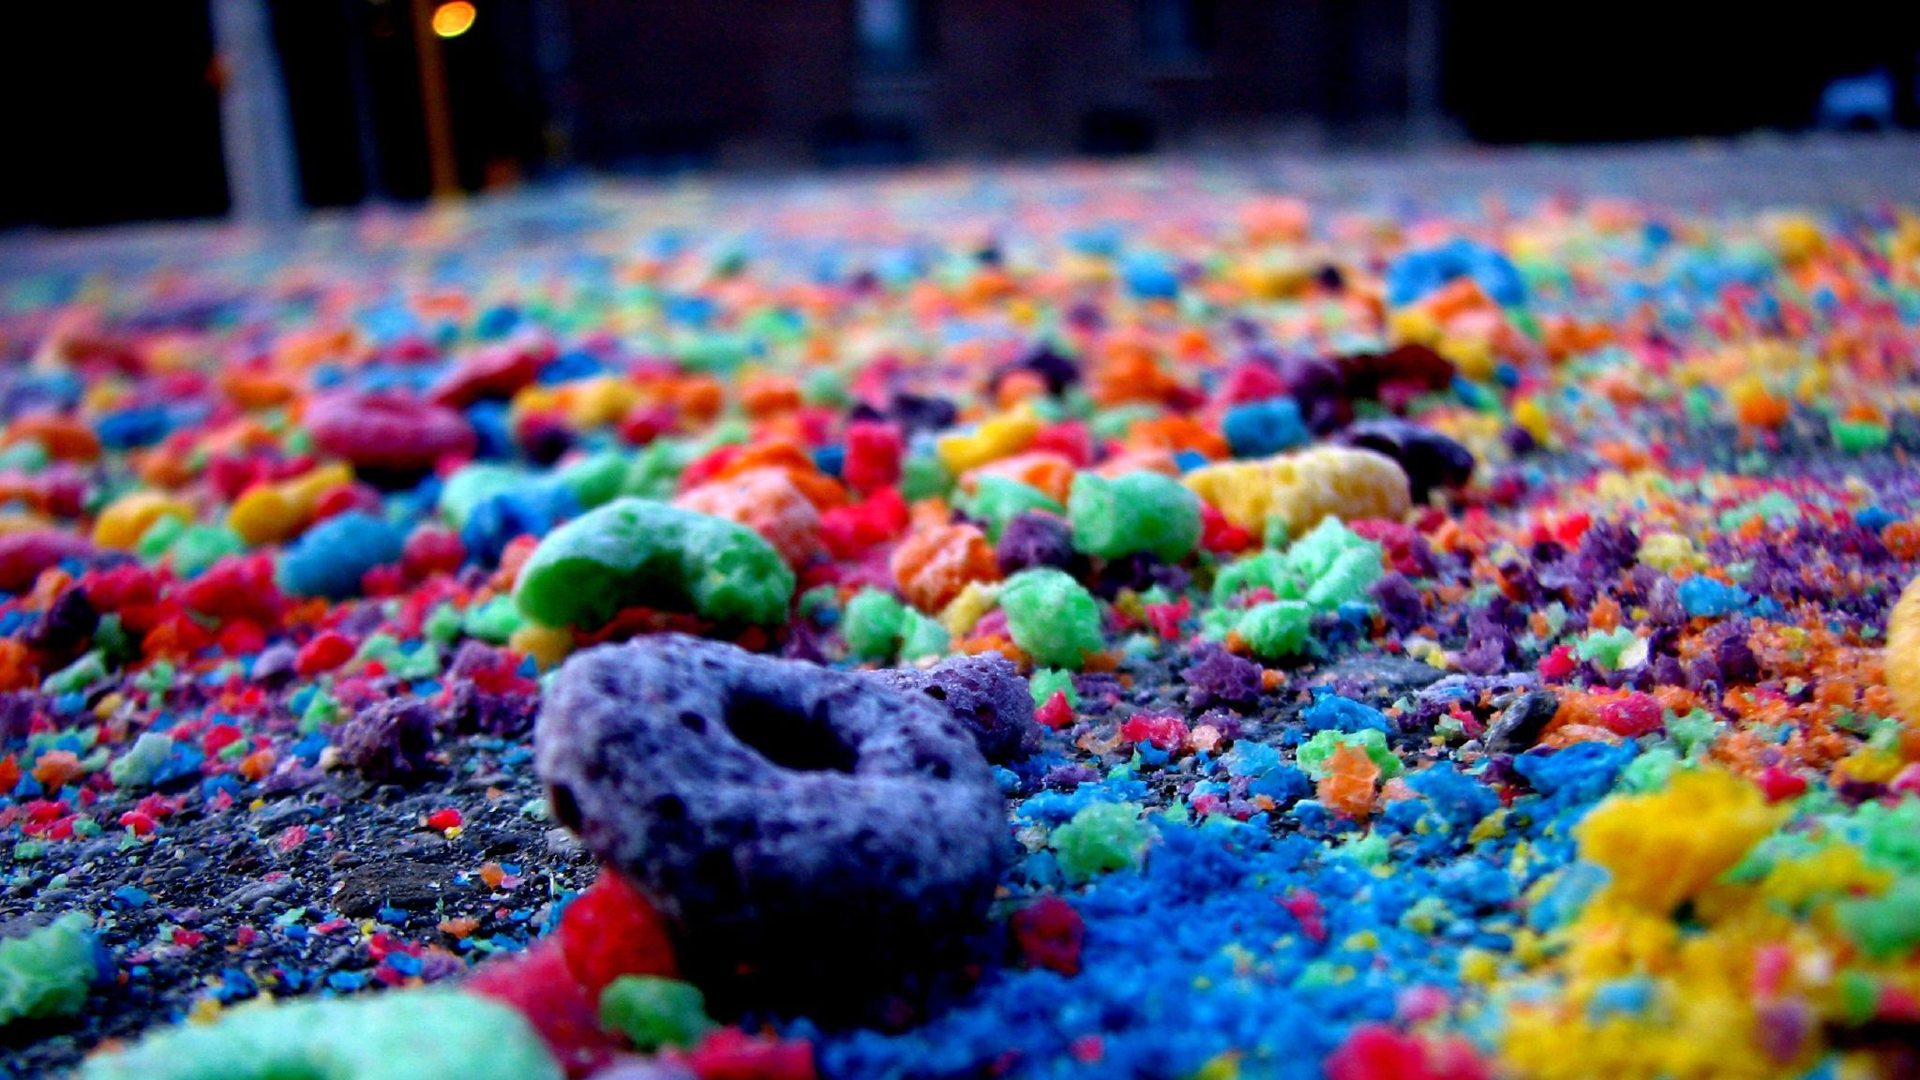 Colourful Randomness - HD Wallpapers